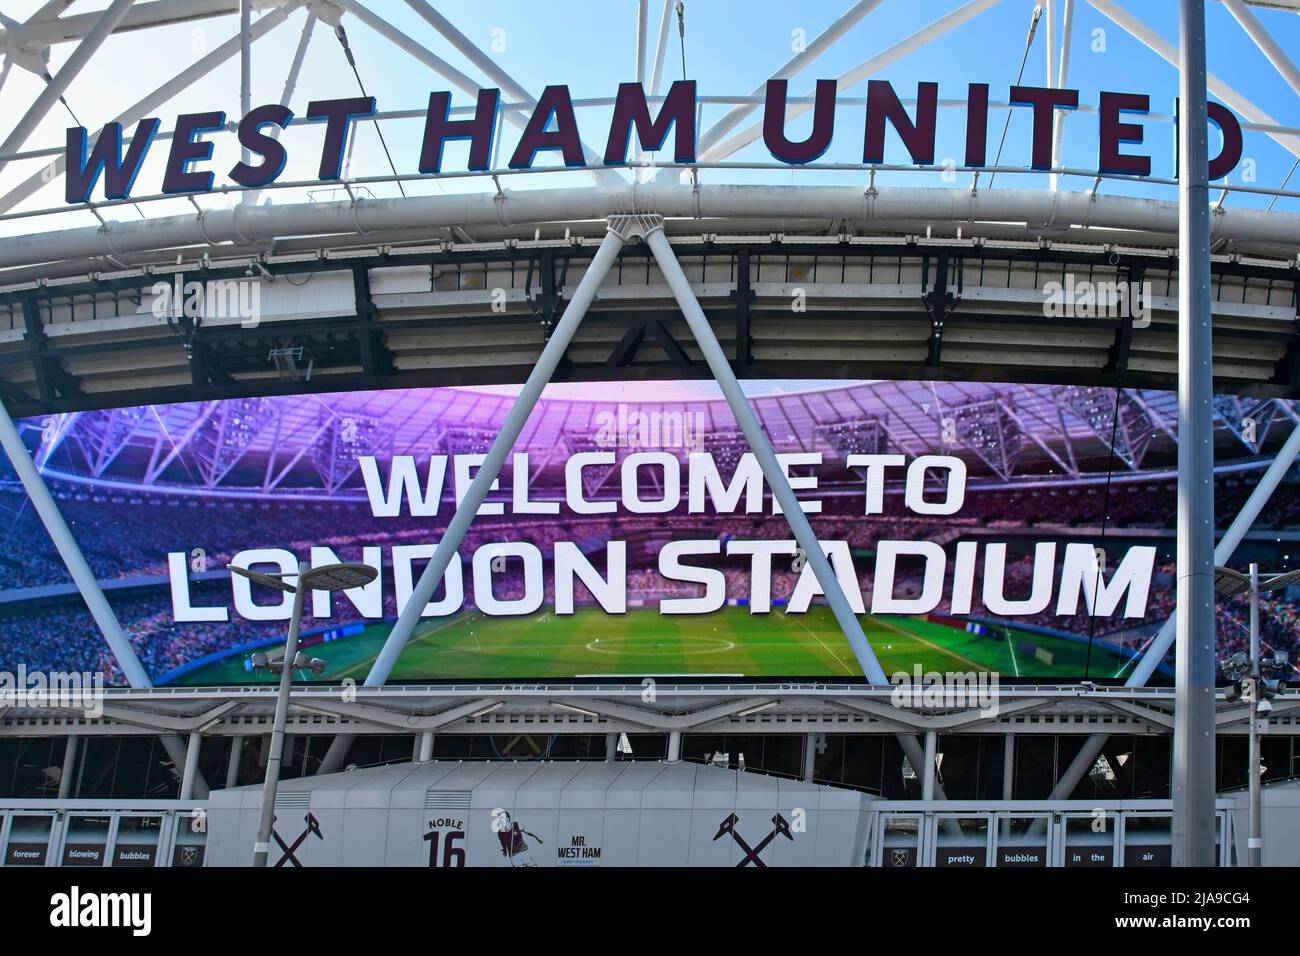 Welcome sign for London Stadium on giant outdoor television screen below West Ham United sign Olympic stadium Queen Elizabeth Olympic park England UK Stock Photo